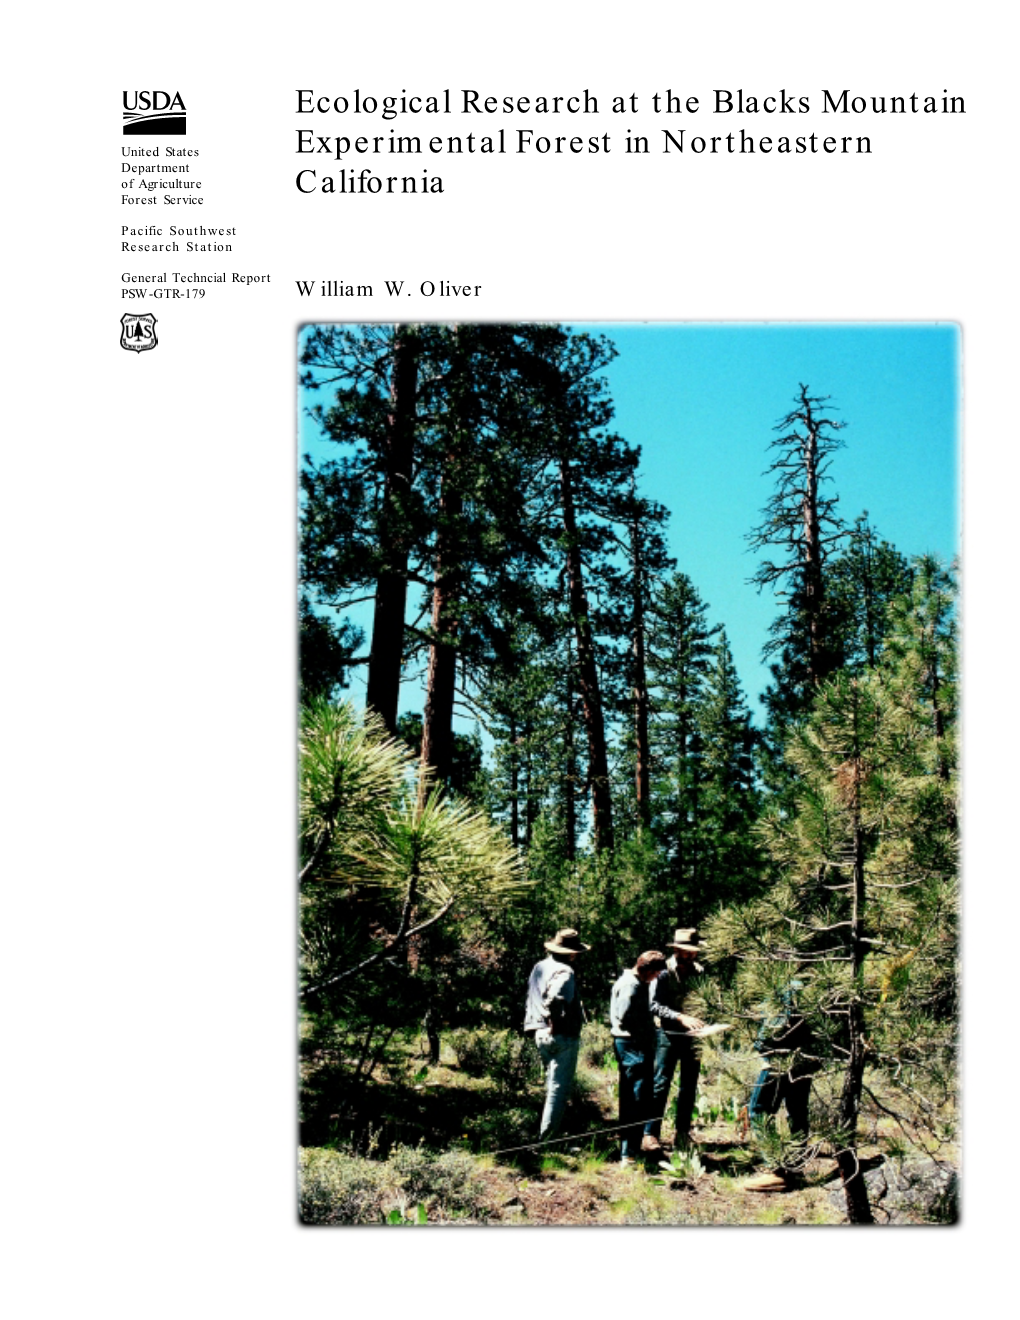 Ecological Research at the Blacks Mountain Experimental Forest in Northeastern California